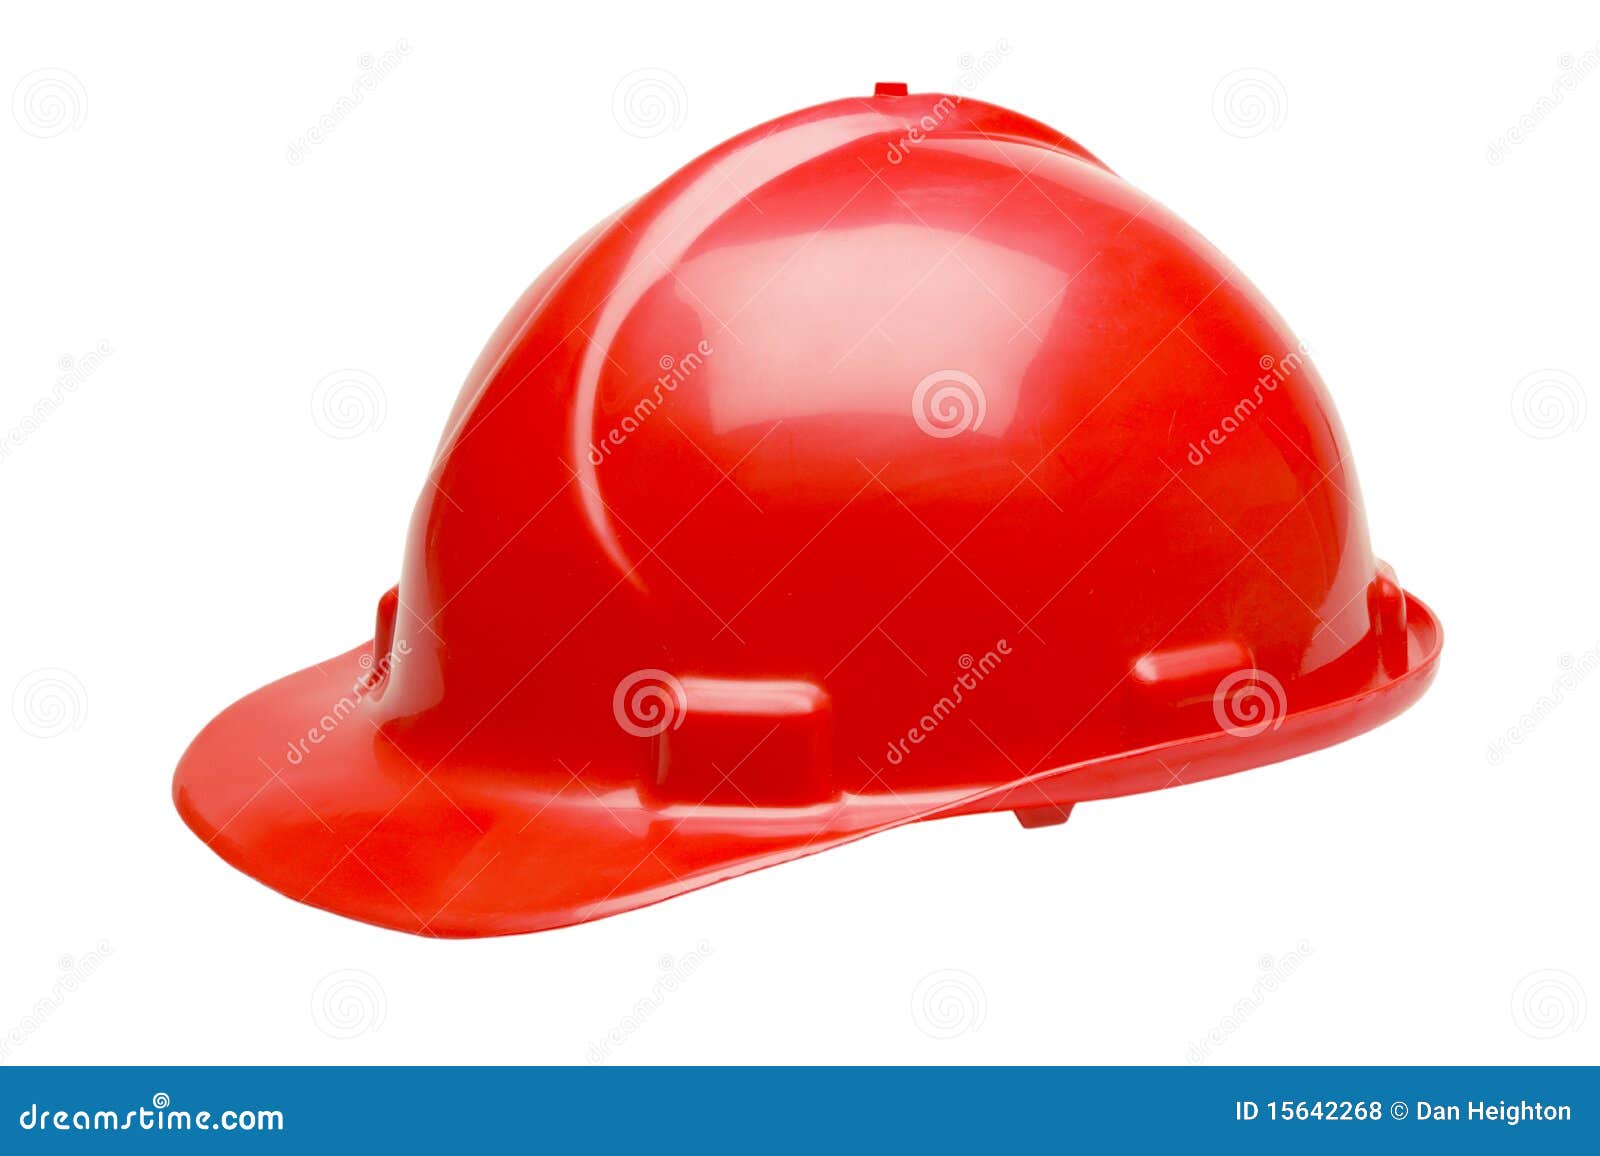 red hard hat clipart - photo #10